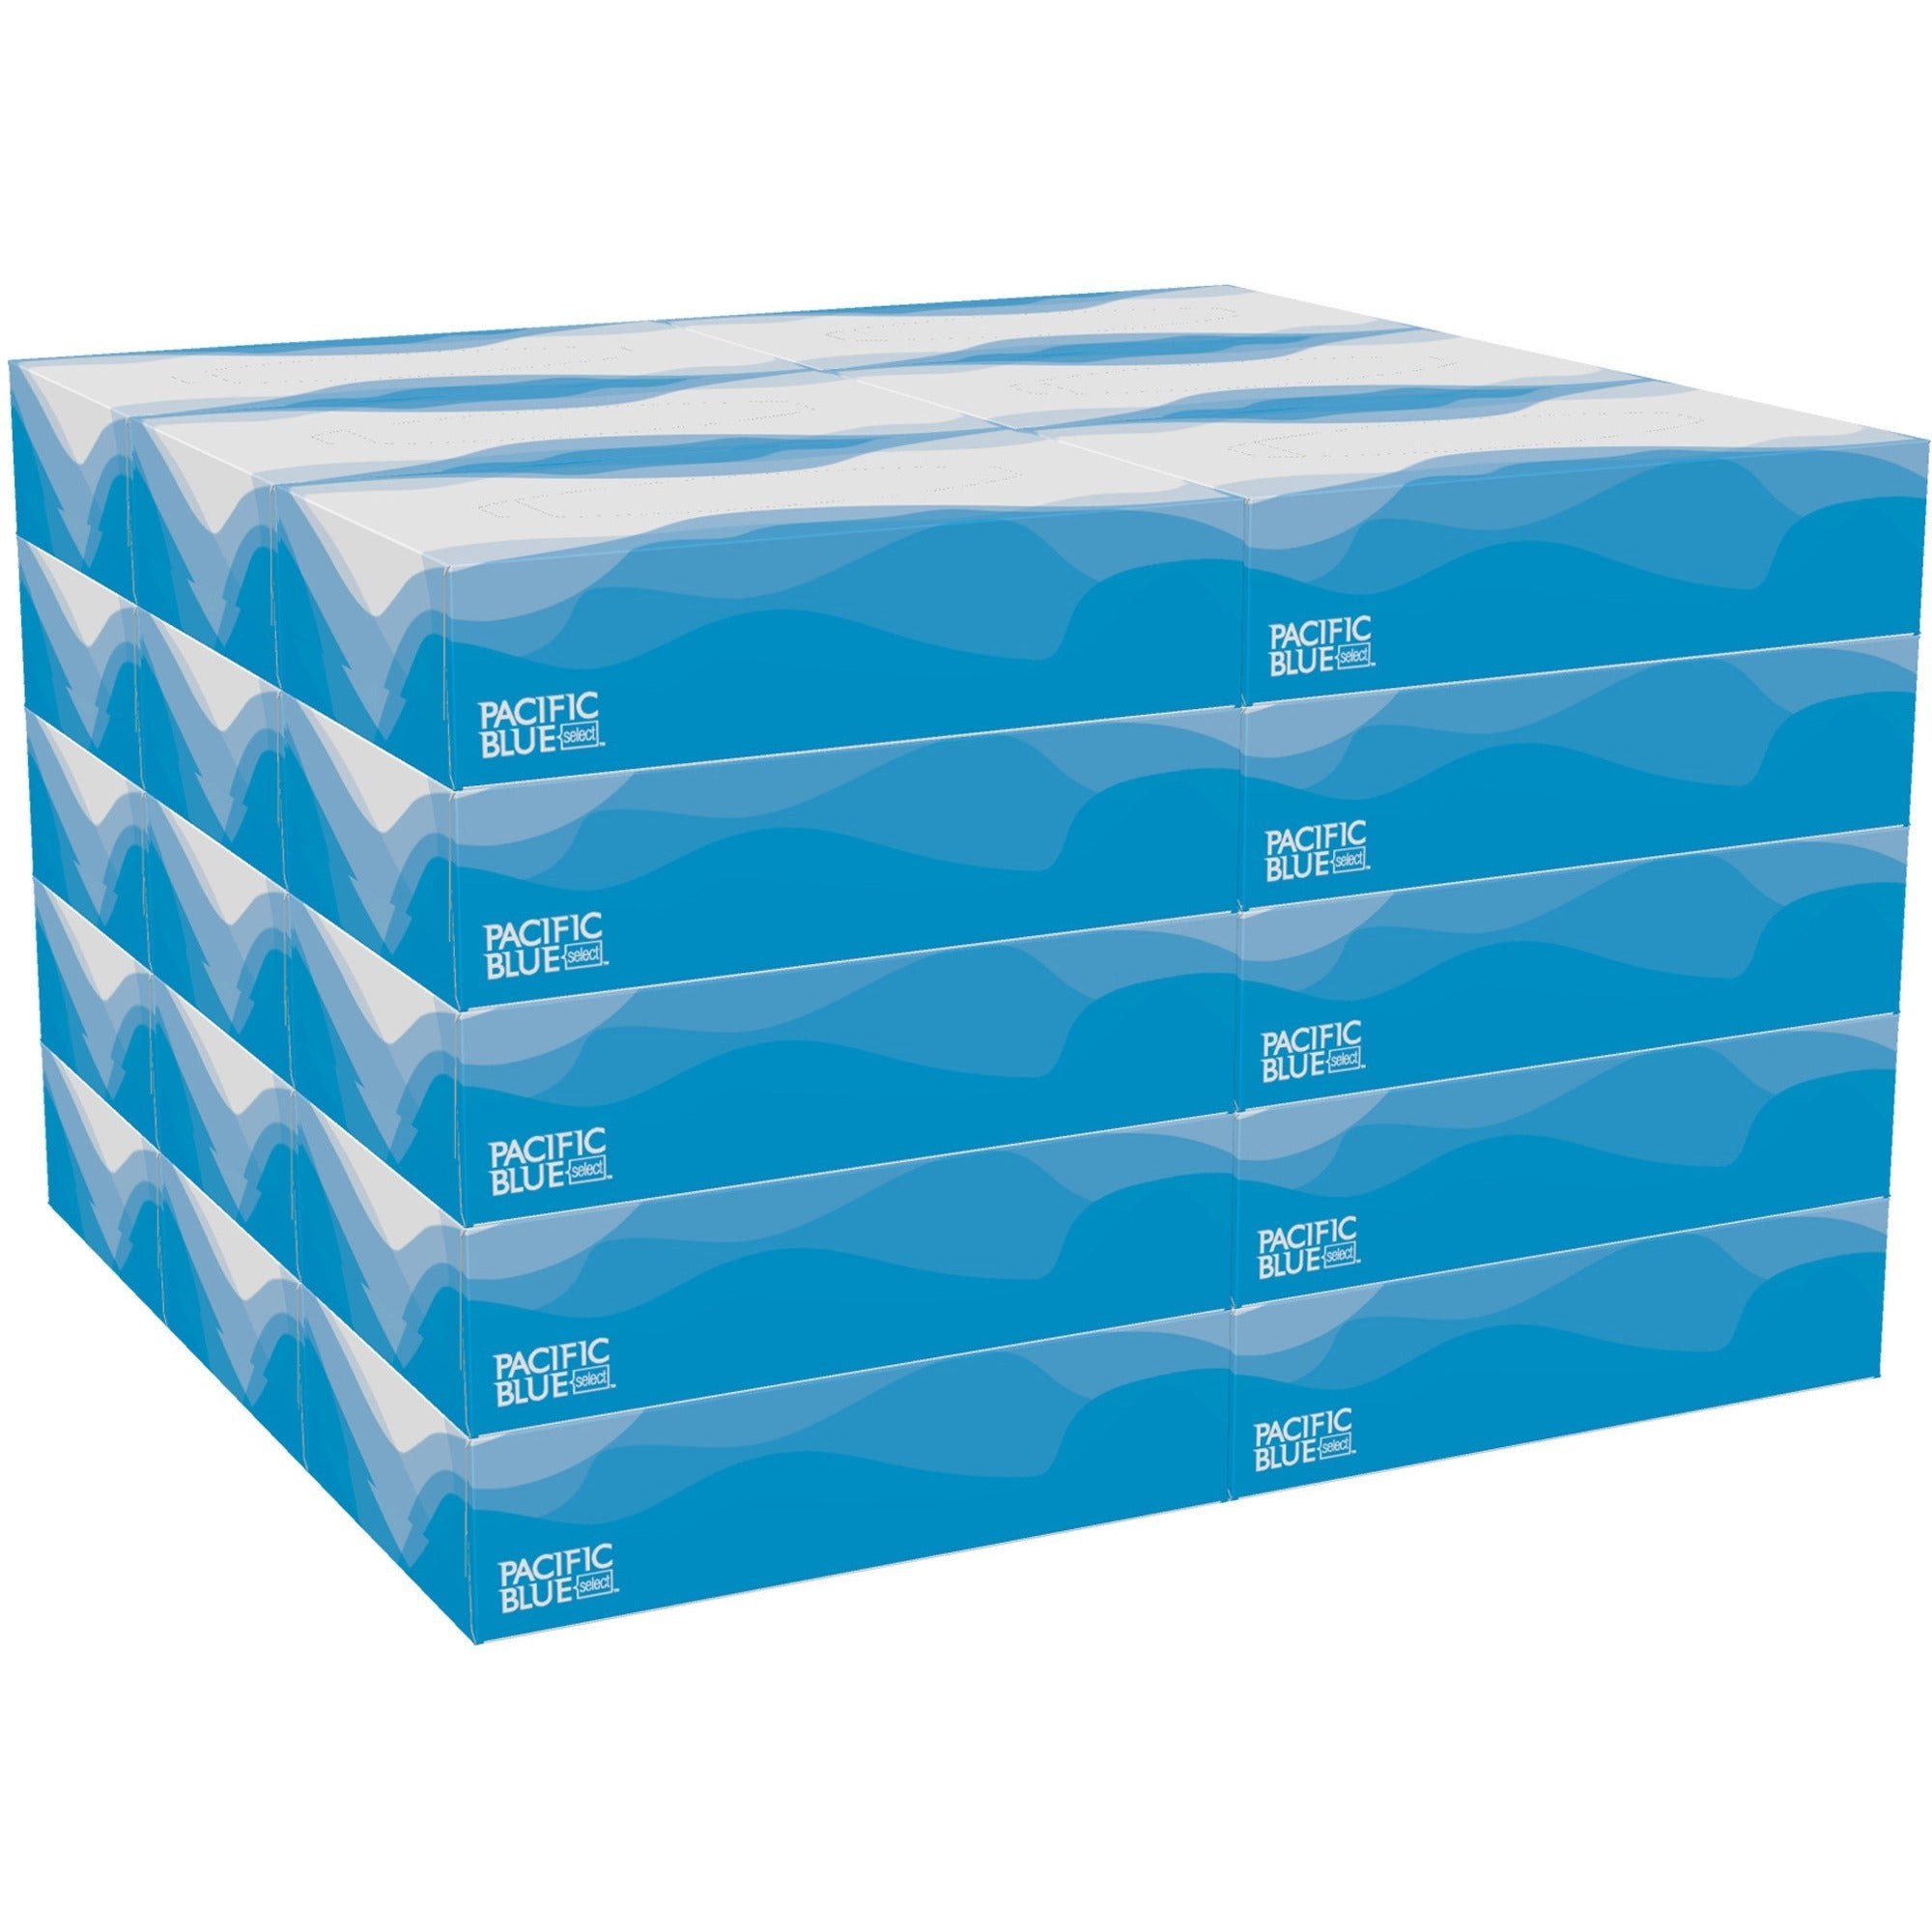 pacific-blue-select-facial-tissue-by-gp-pro-flat-box-2-ply-833-x-8-white-paper-soft-absorbent-for-office-building-100-per-box-30-carton_gpc48100ct - 1